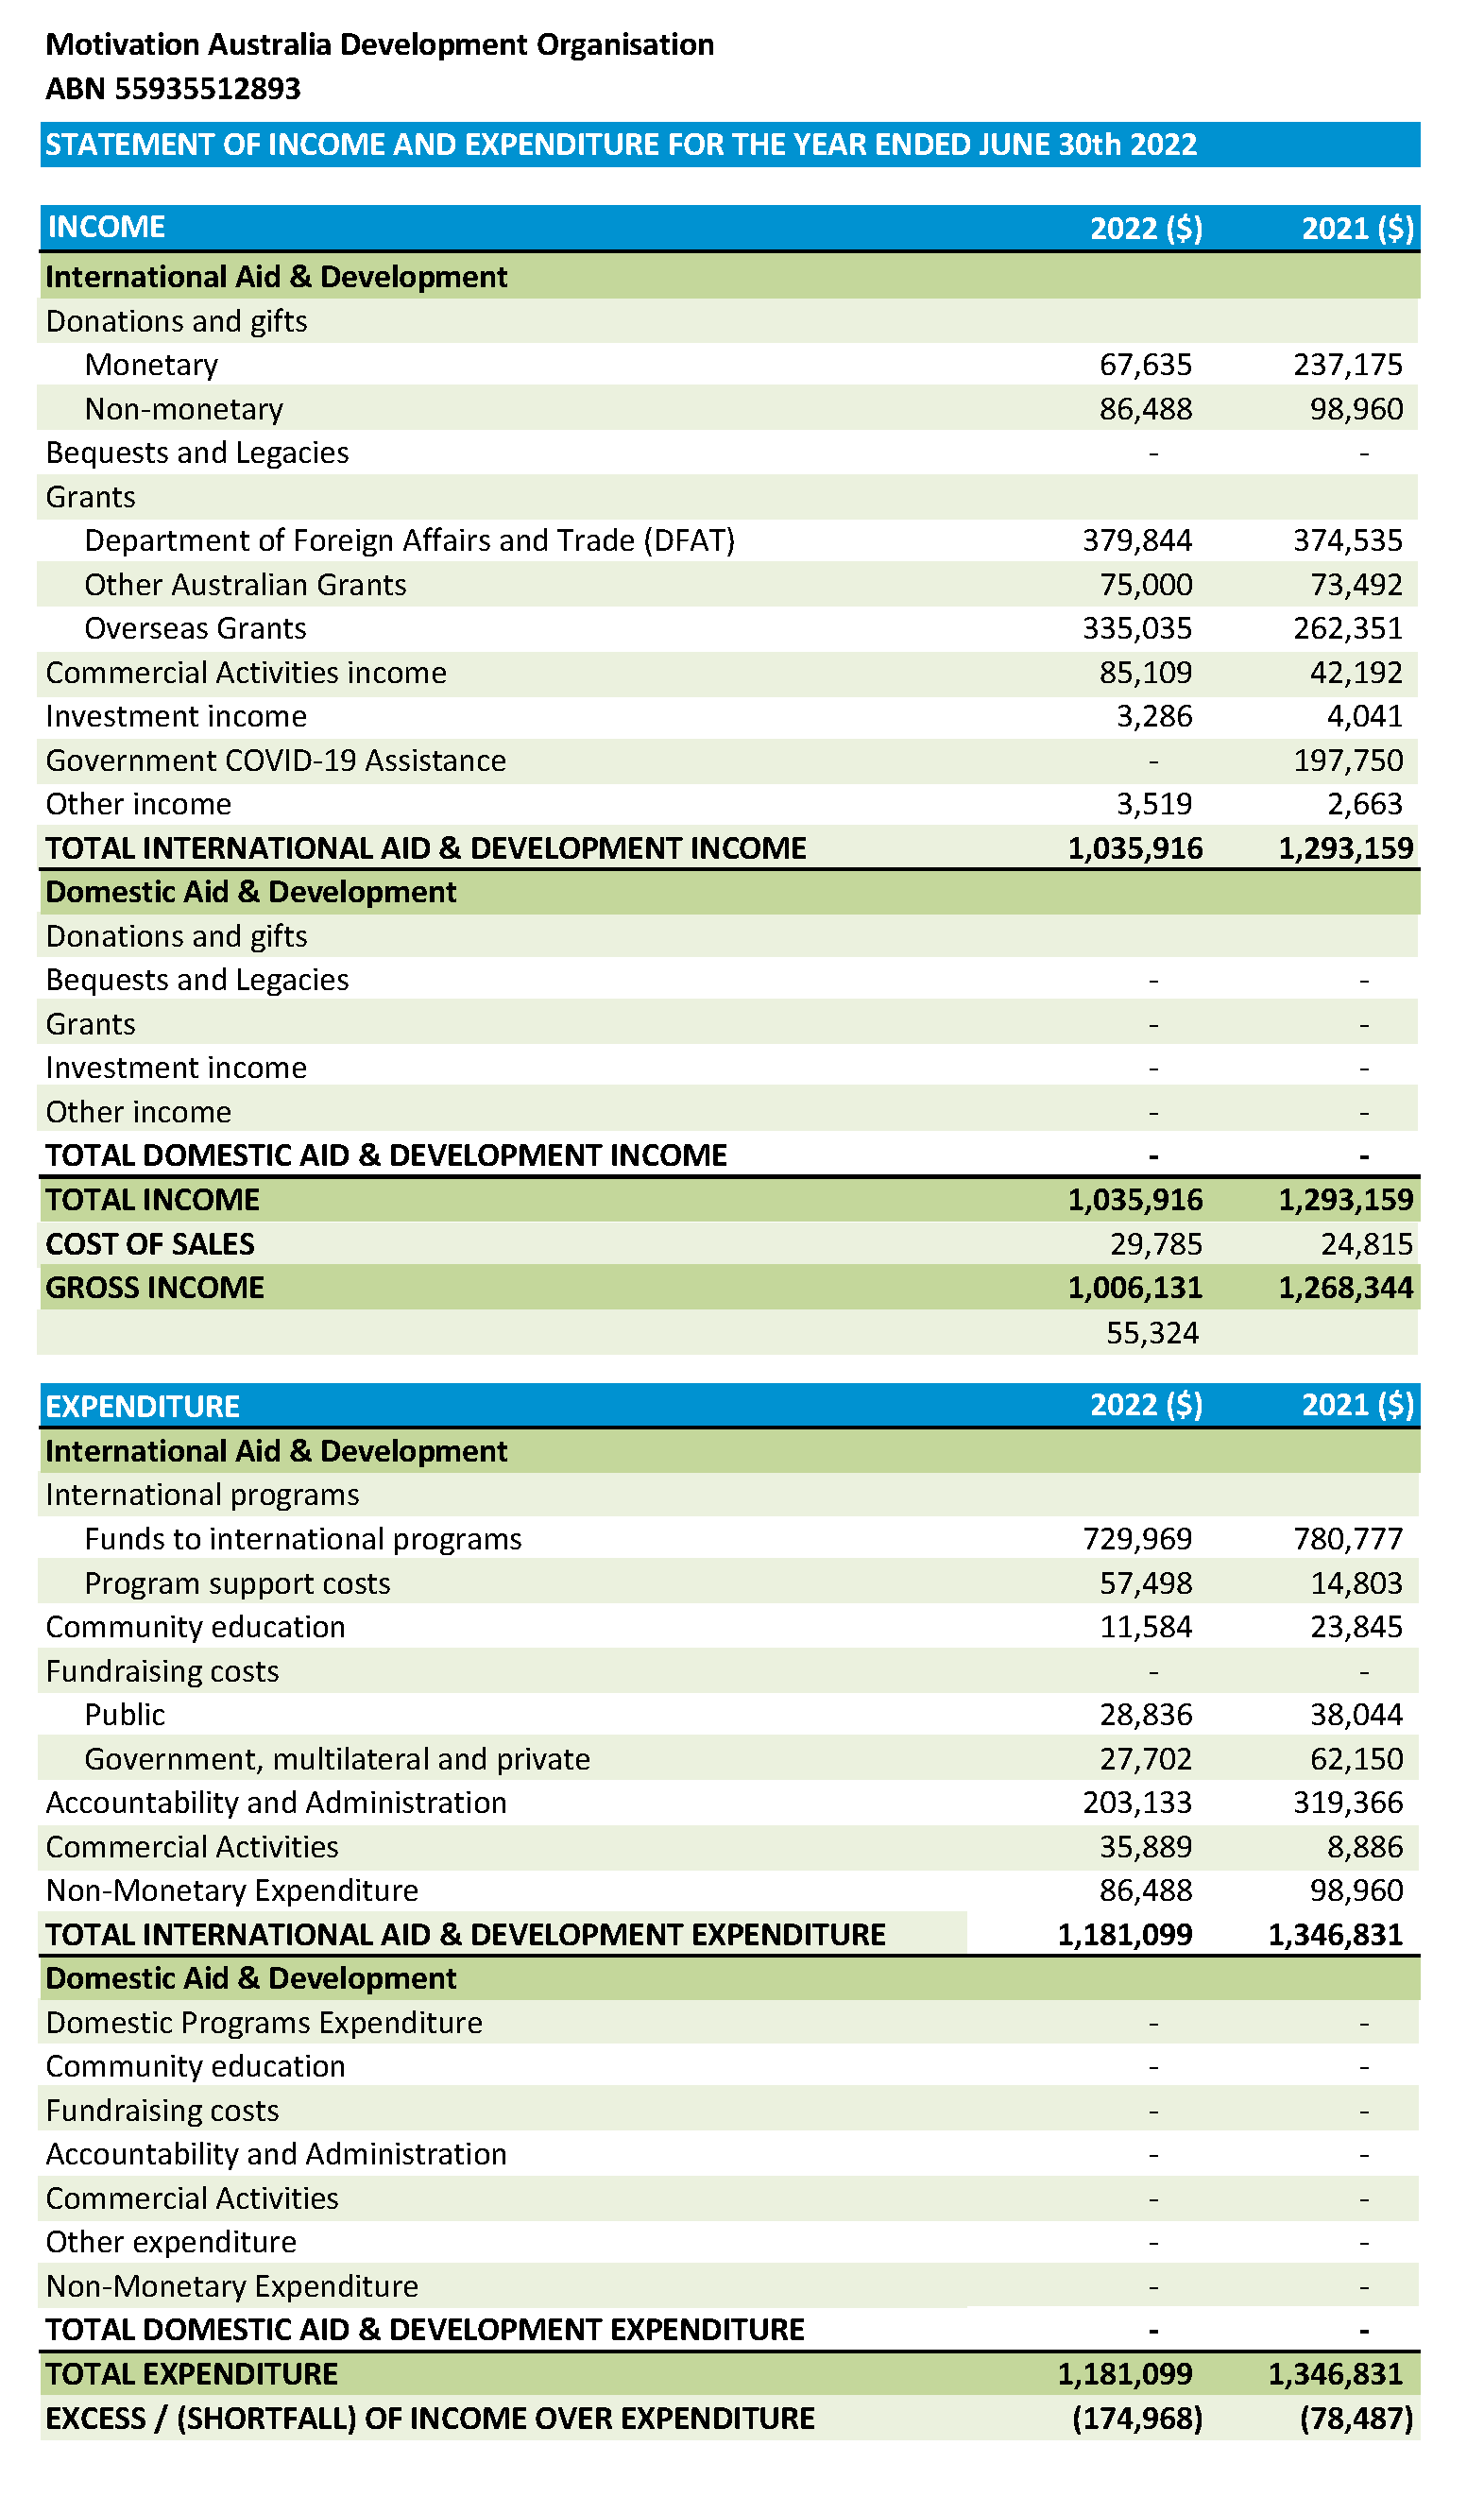 Motivation Australia Summary Statement of Income and Expenditure for 2021 to 2022.